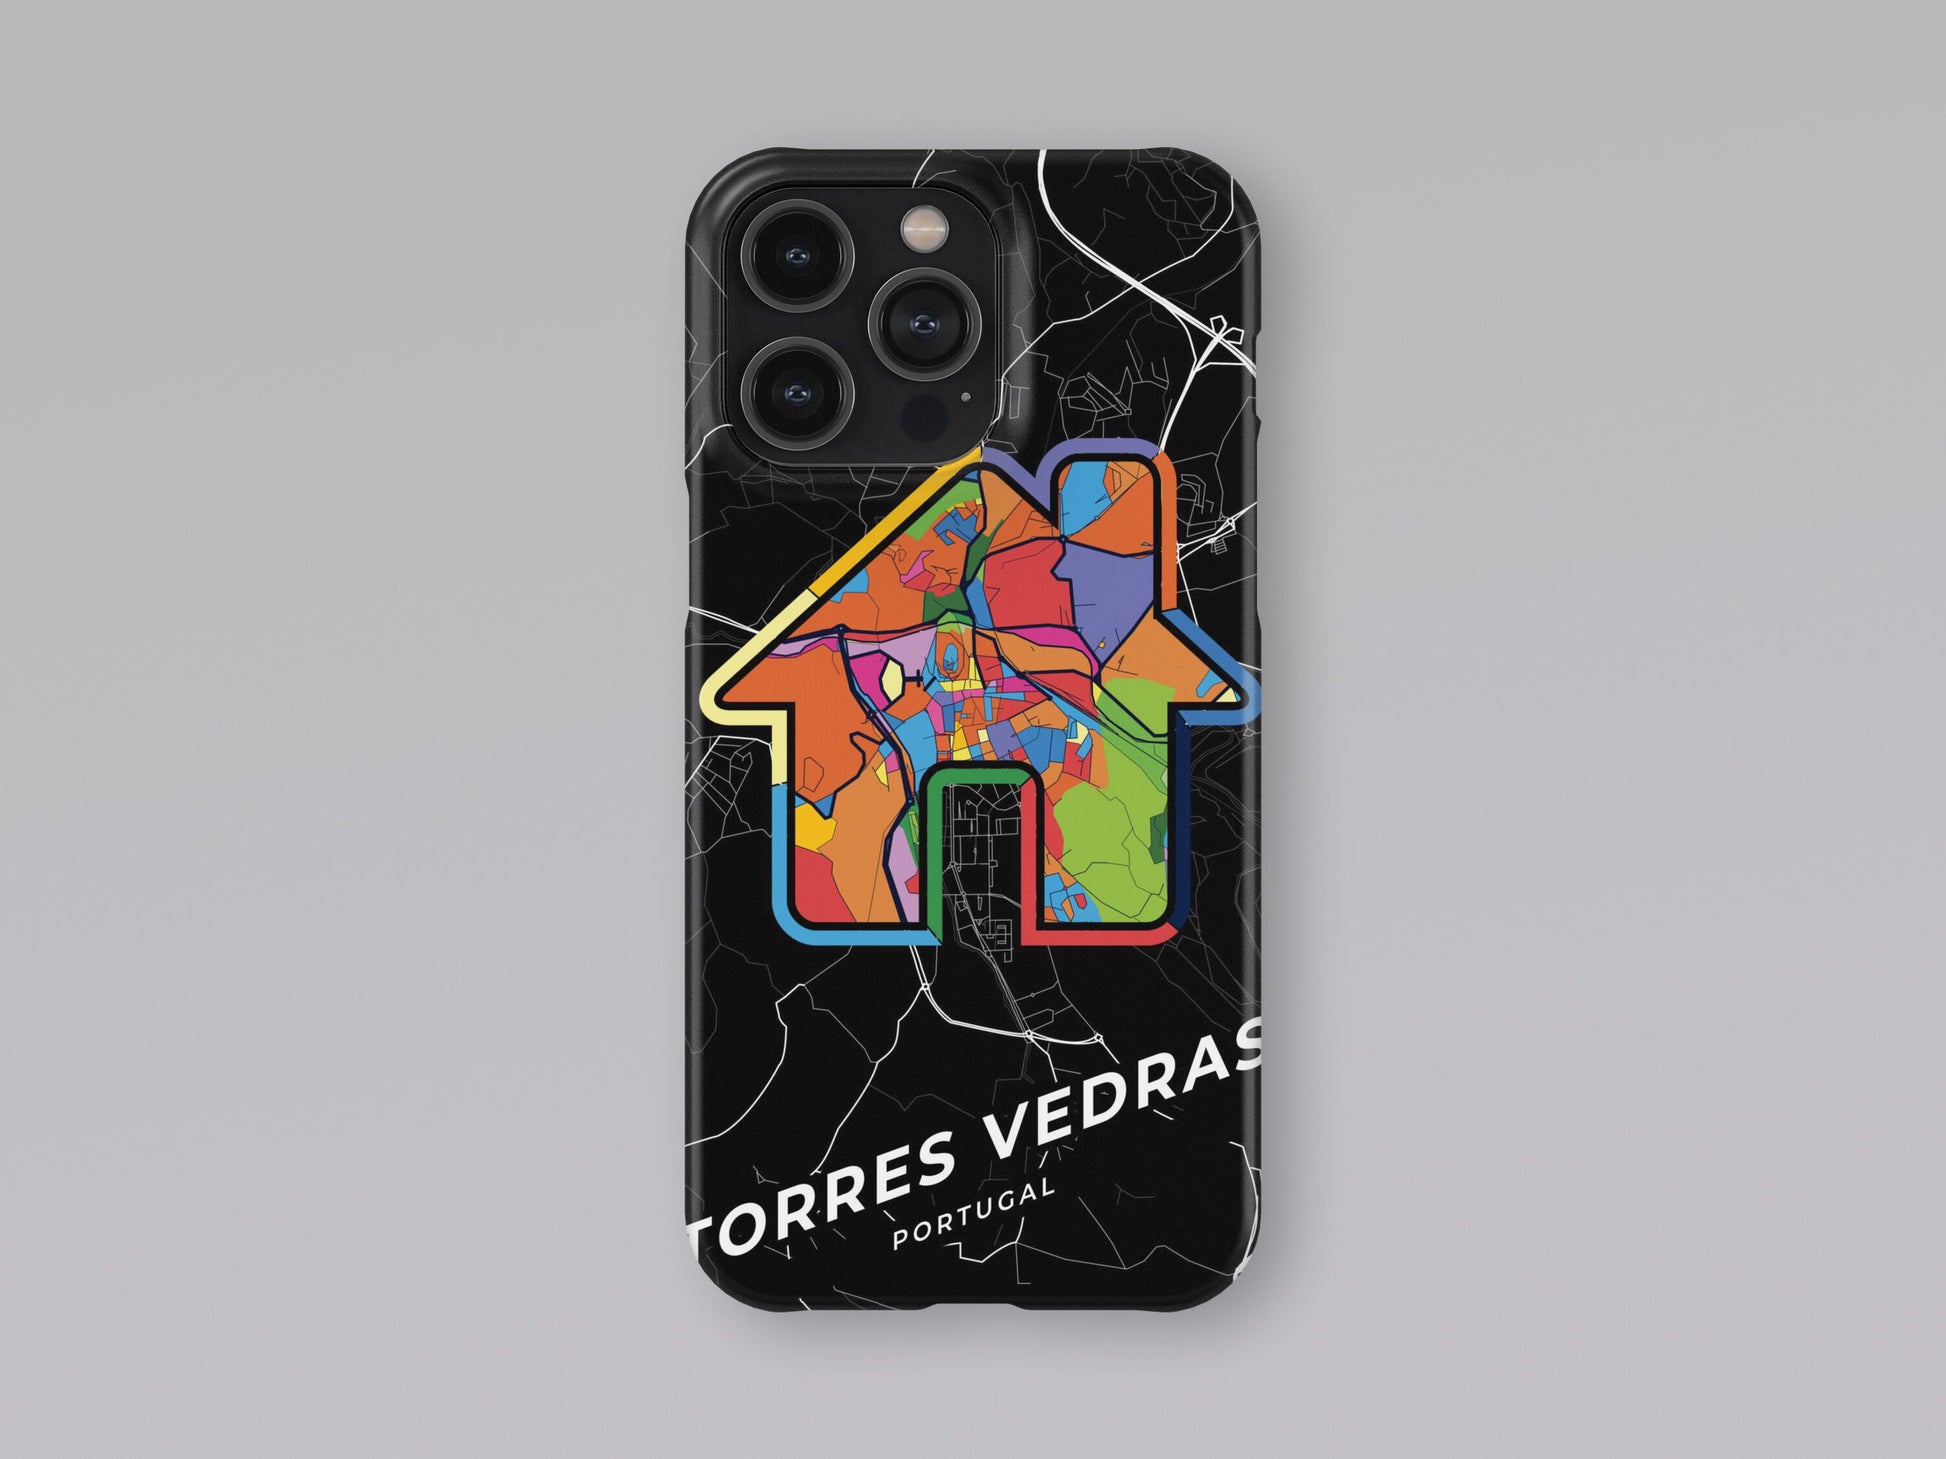 Torres Vedras Portugal slim phone case with colorful icon 3